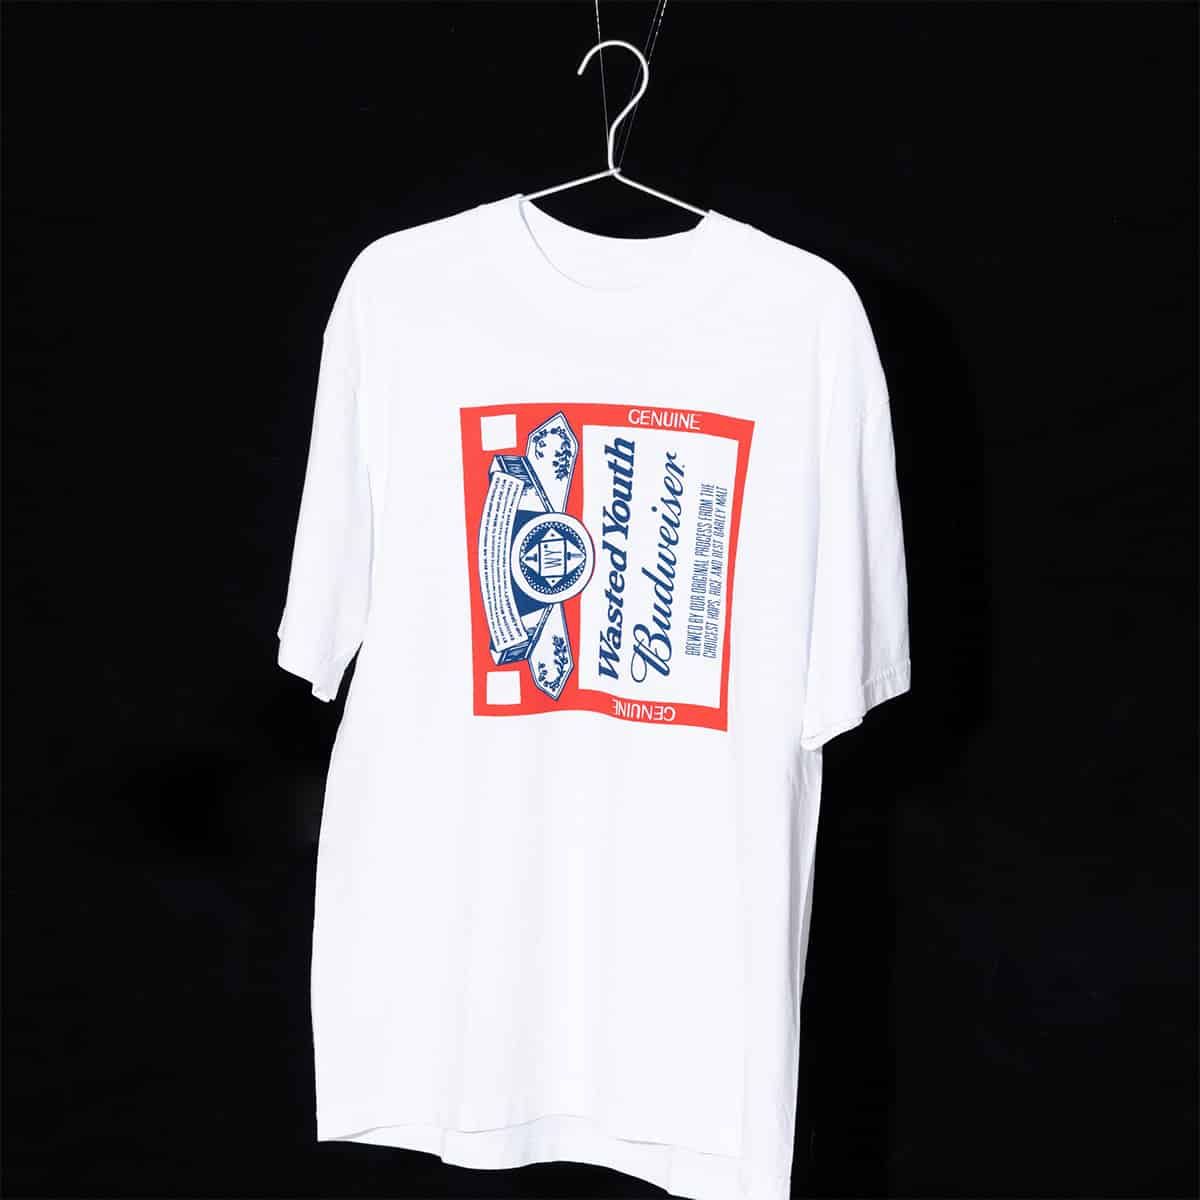 Wasted Youth x Budweiser Tシャツ